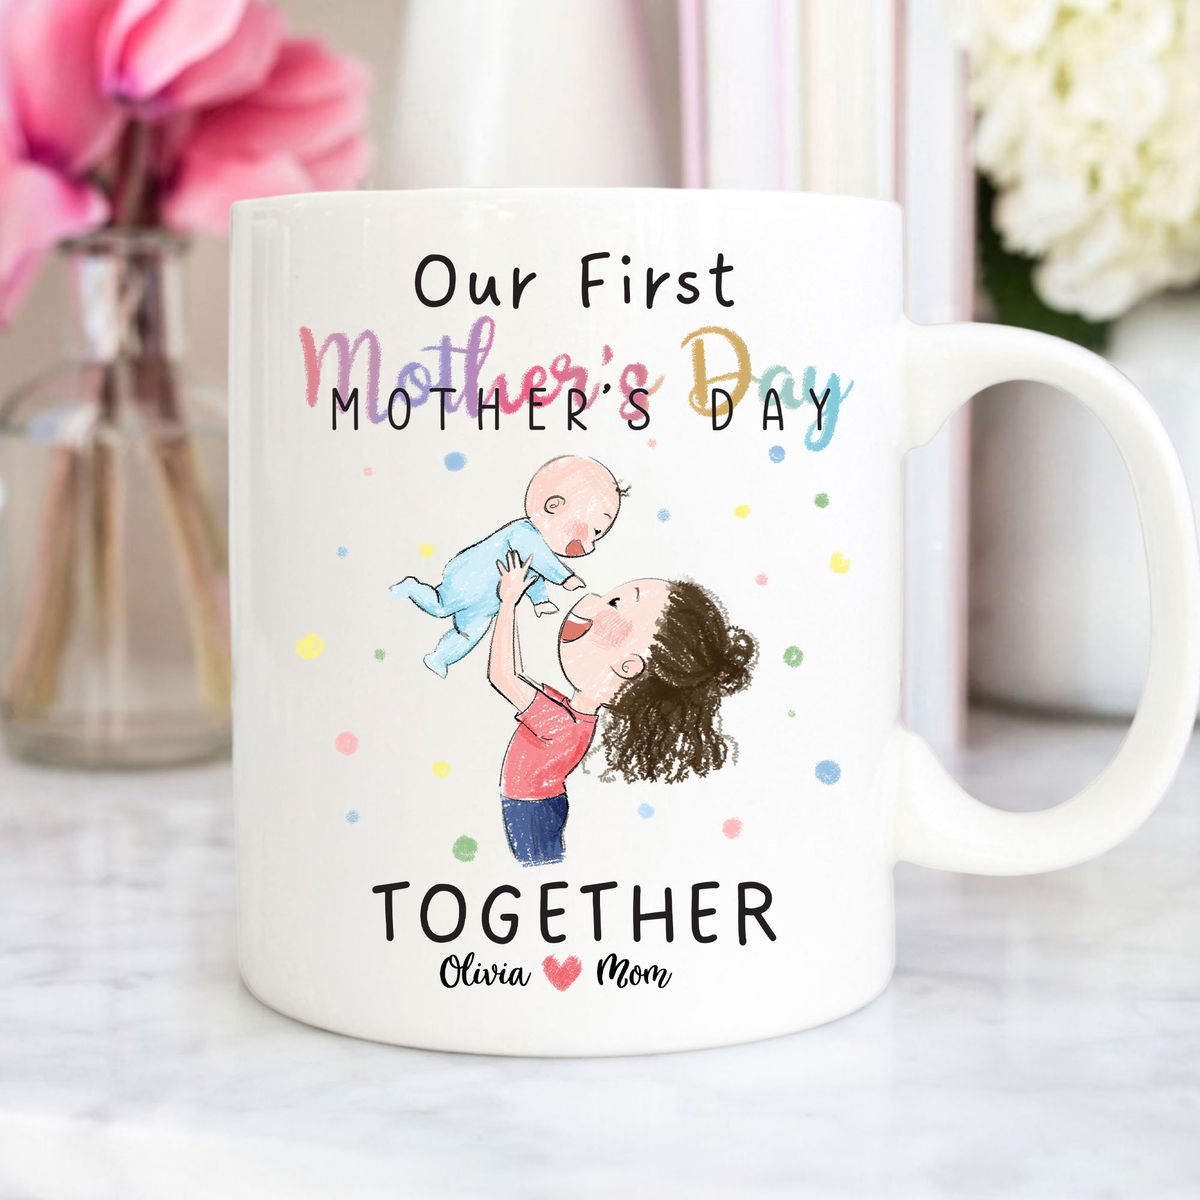 Personalized Mug - Mother's Day Mug - Our First Mother's Day Together - Mother's Day, Birthday Gifts_2